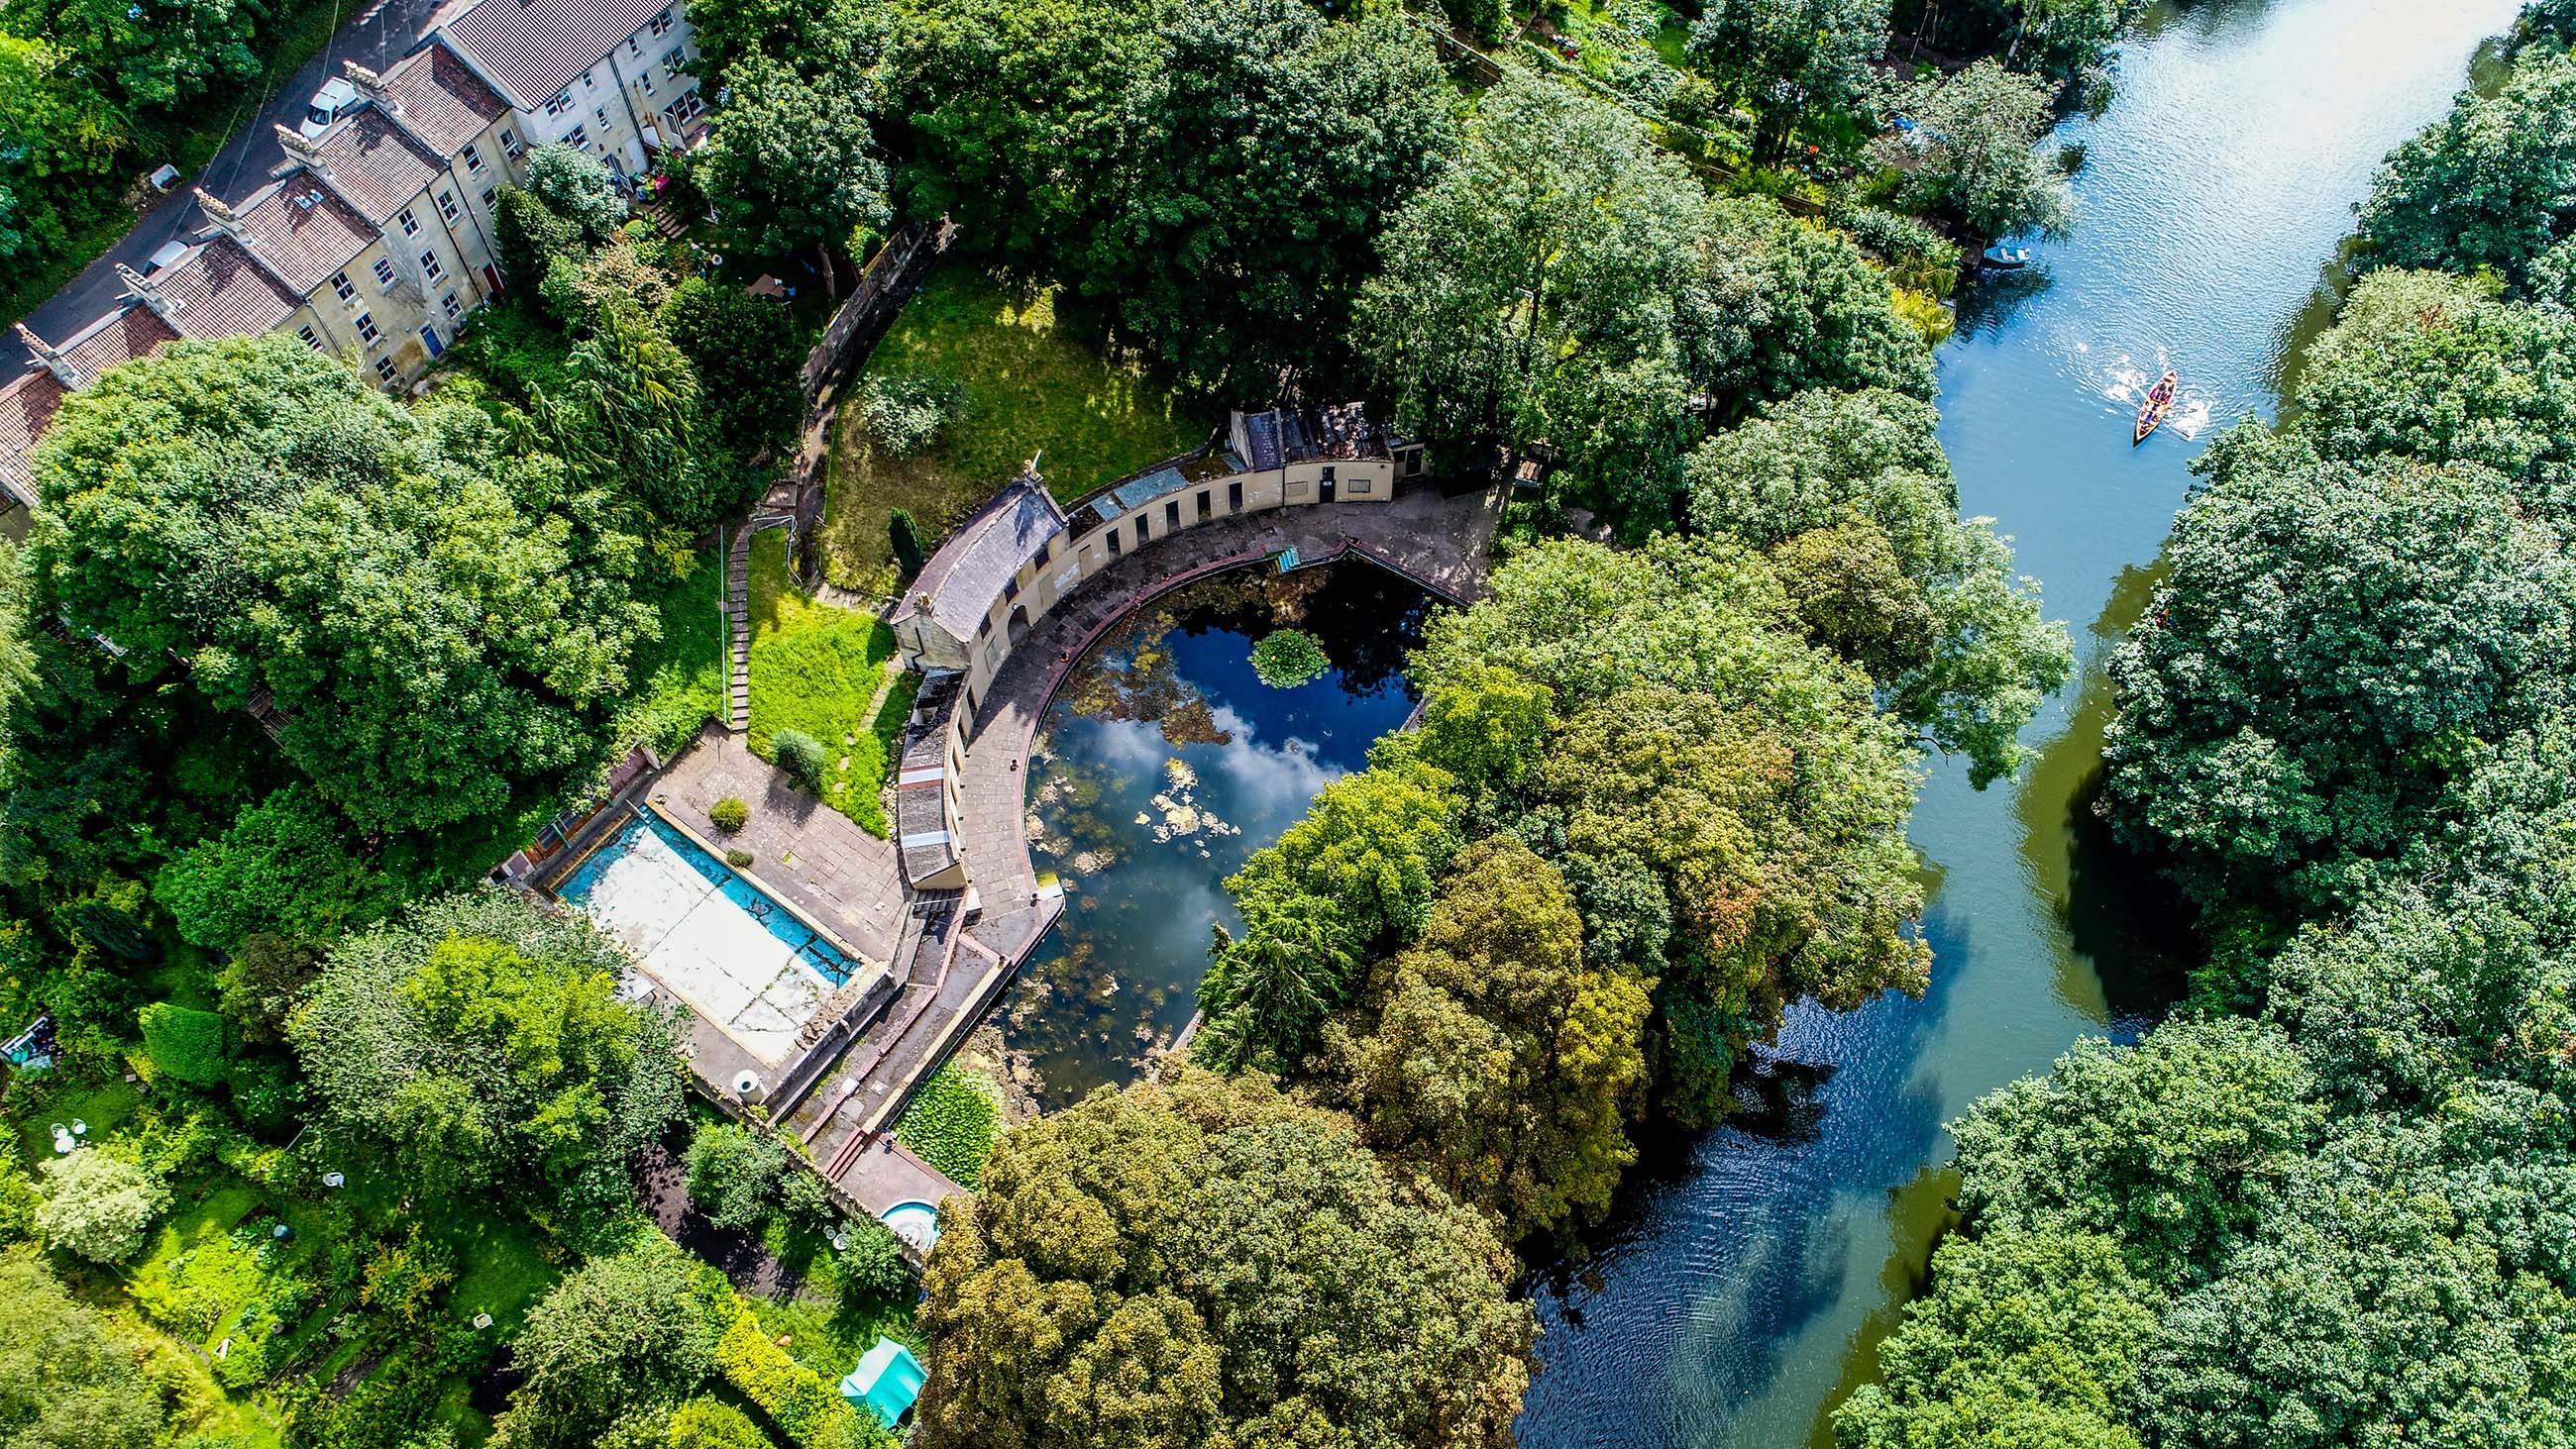 An aerial view of a crescent-shaped outdoor swimming pool set beside a river surrounded by trees and gardens